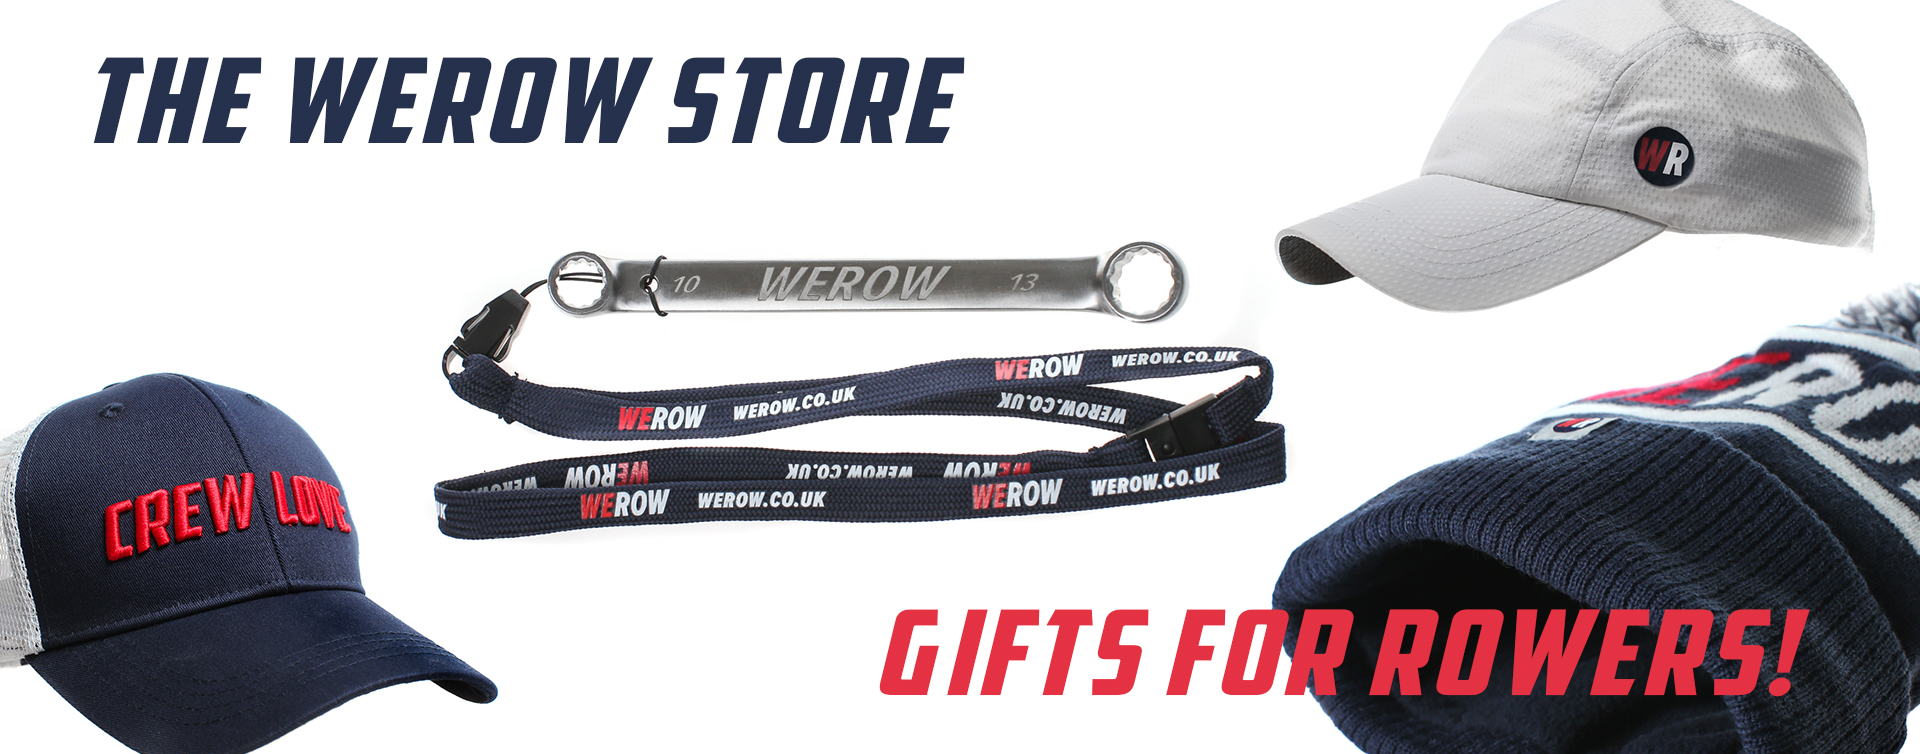 Gifts for rowers from the WEROW store - Paul Thompson leaves British Rowing after 18 years